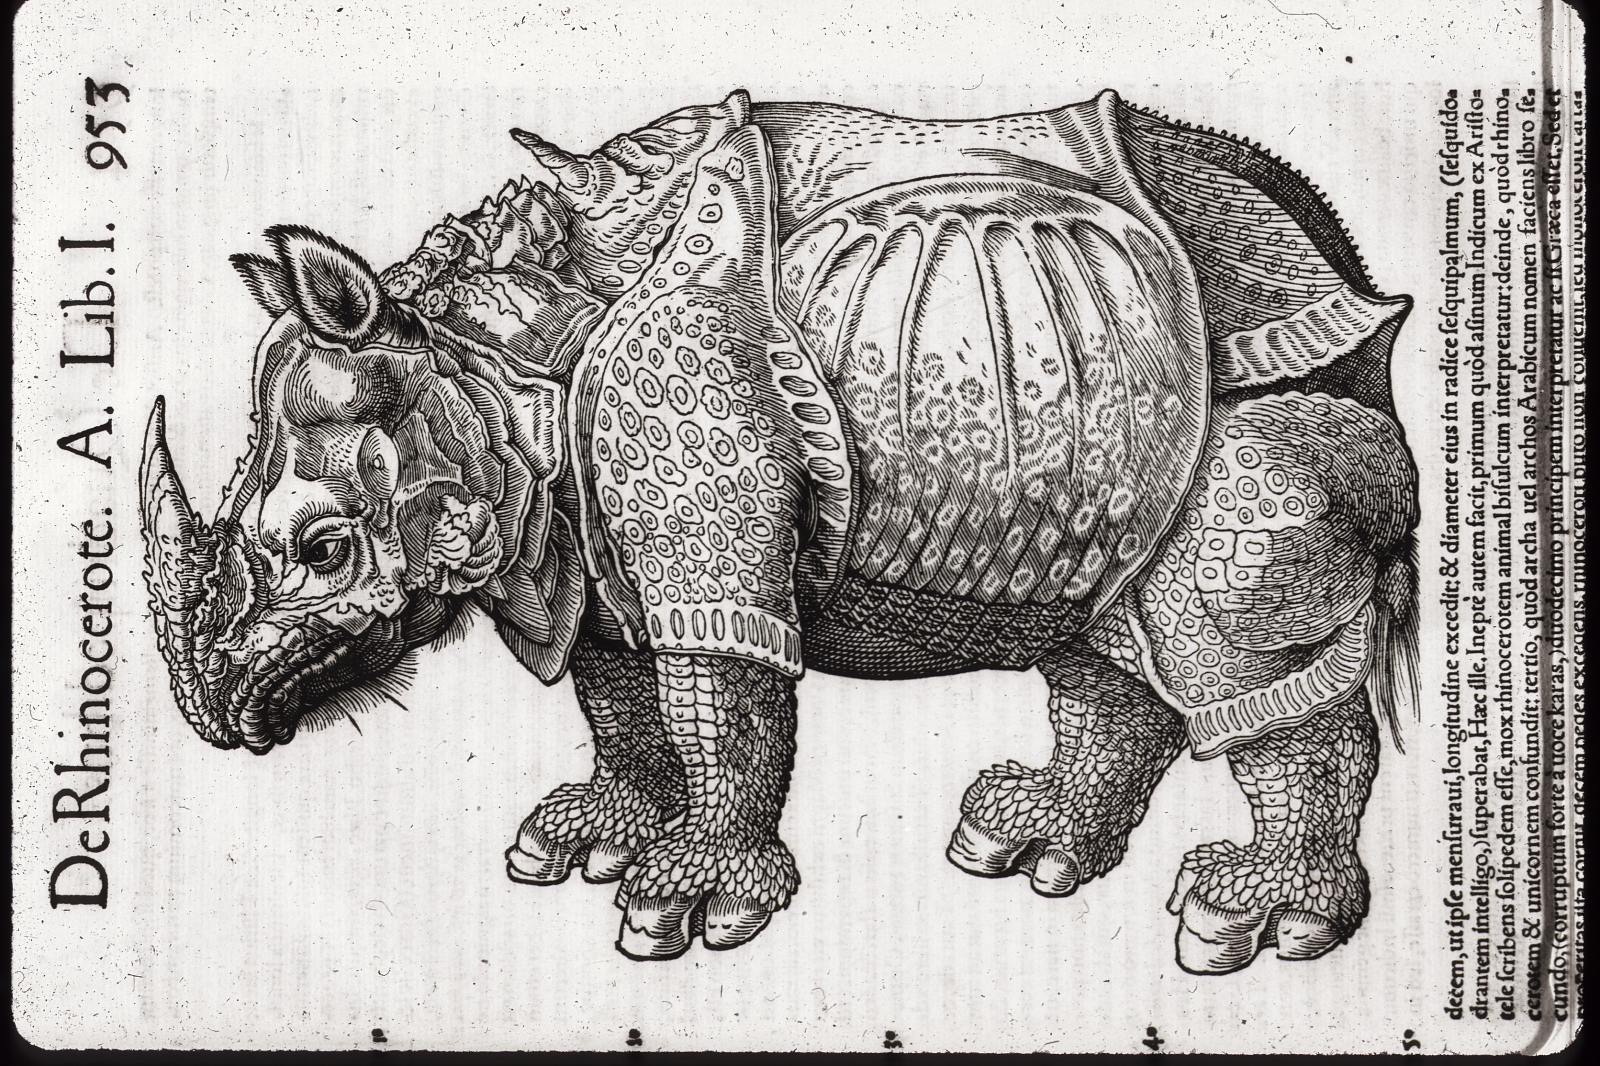 Why is that Rhinoceros Wearing a Suit of Armor?